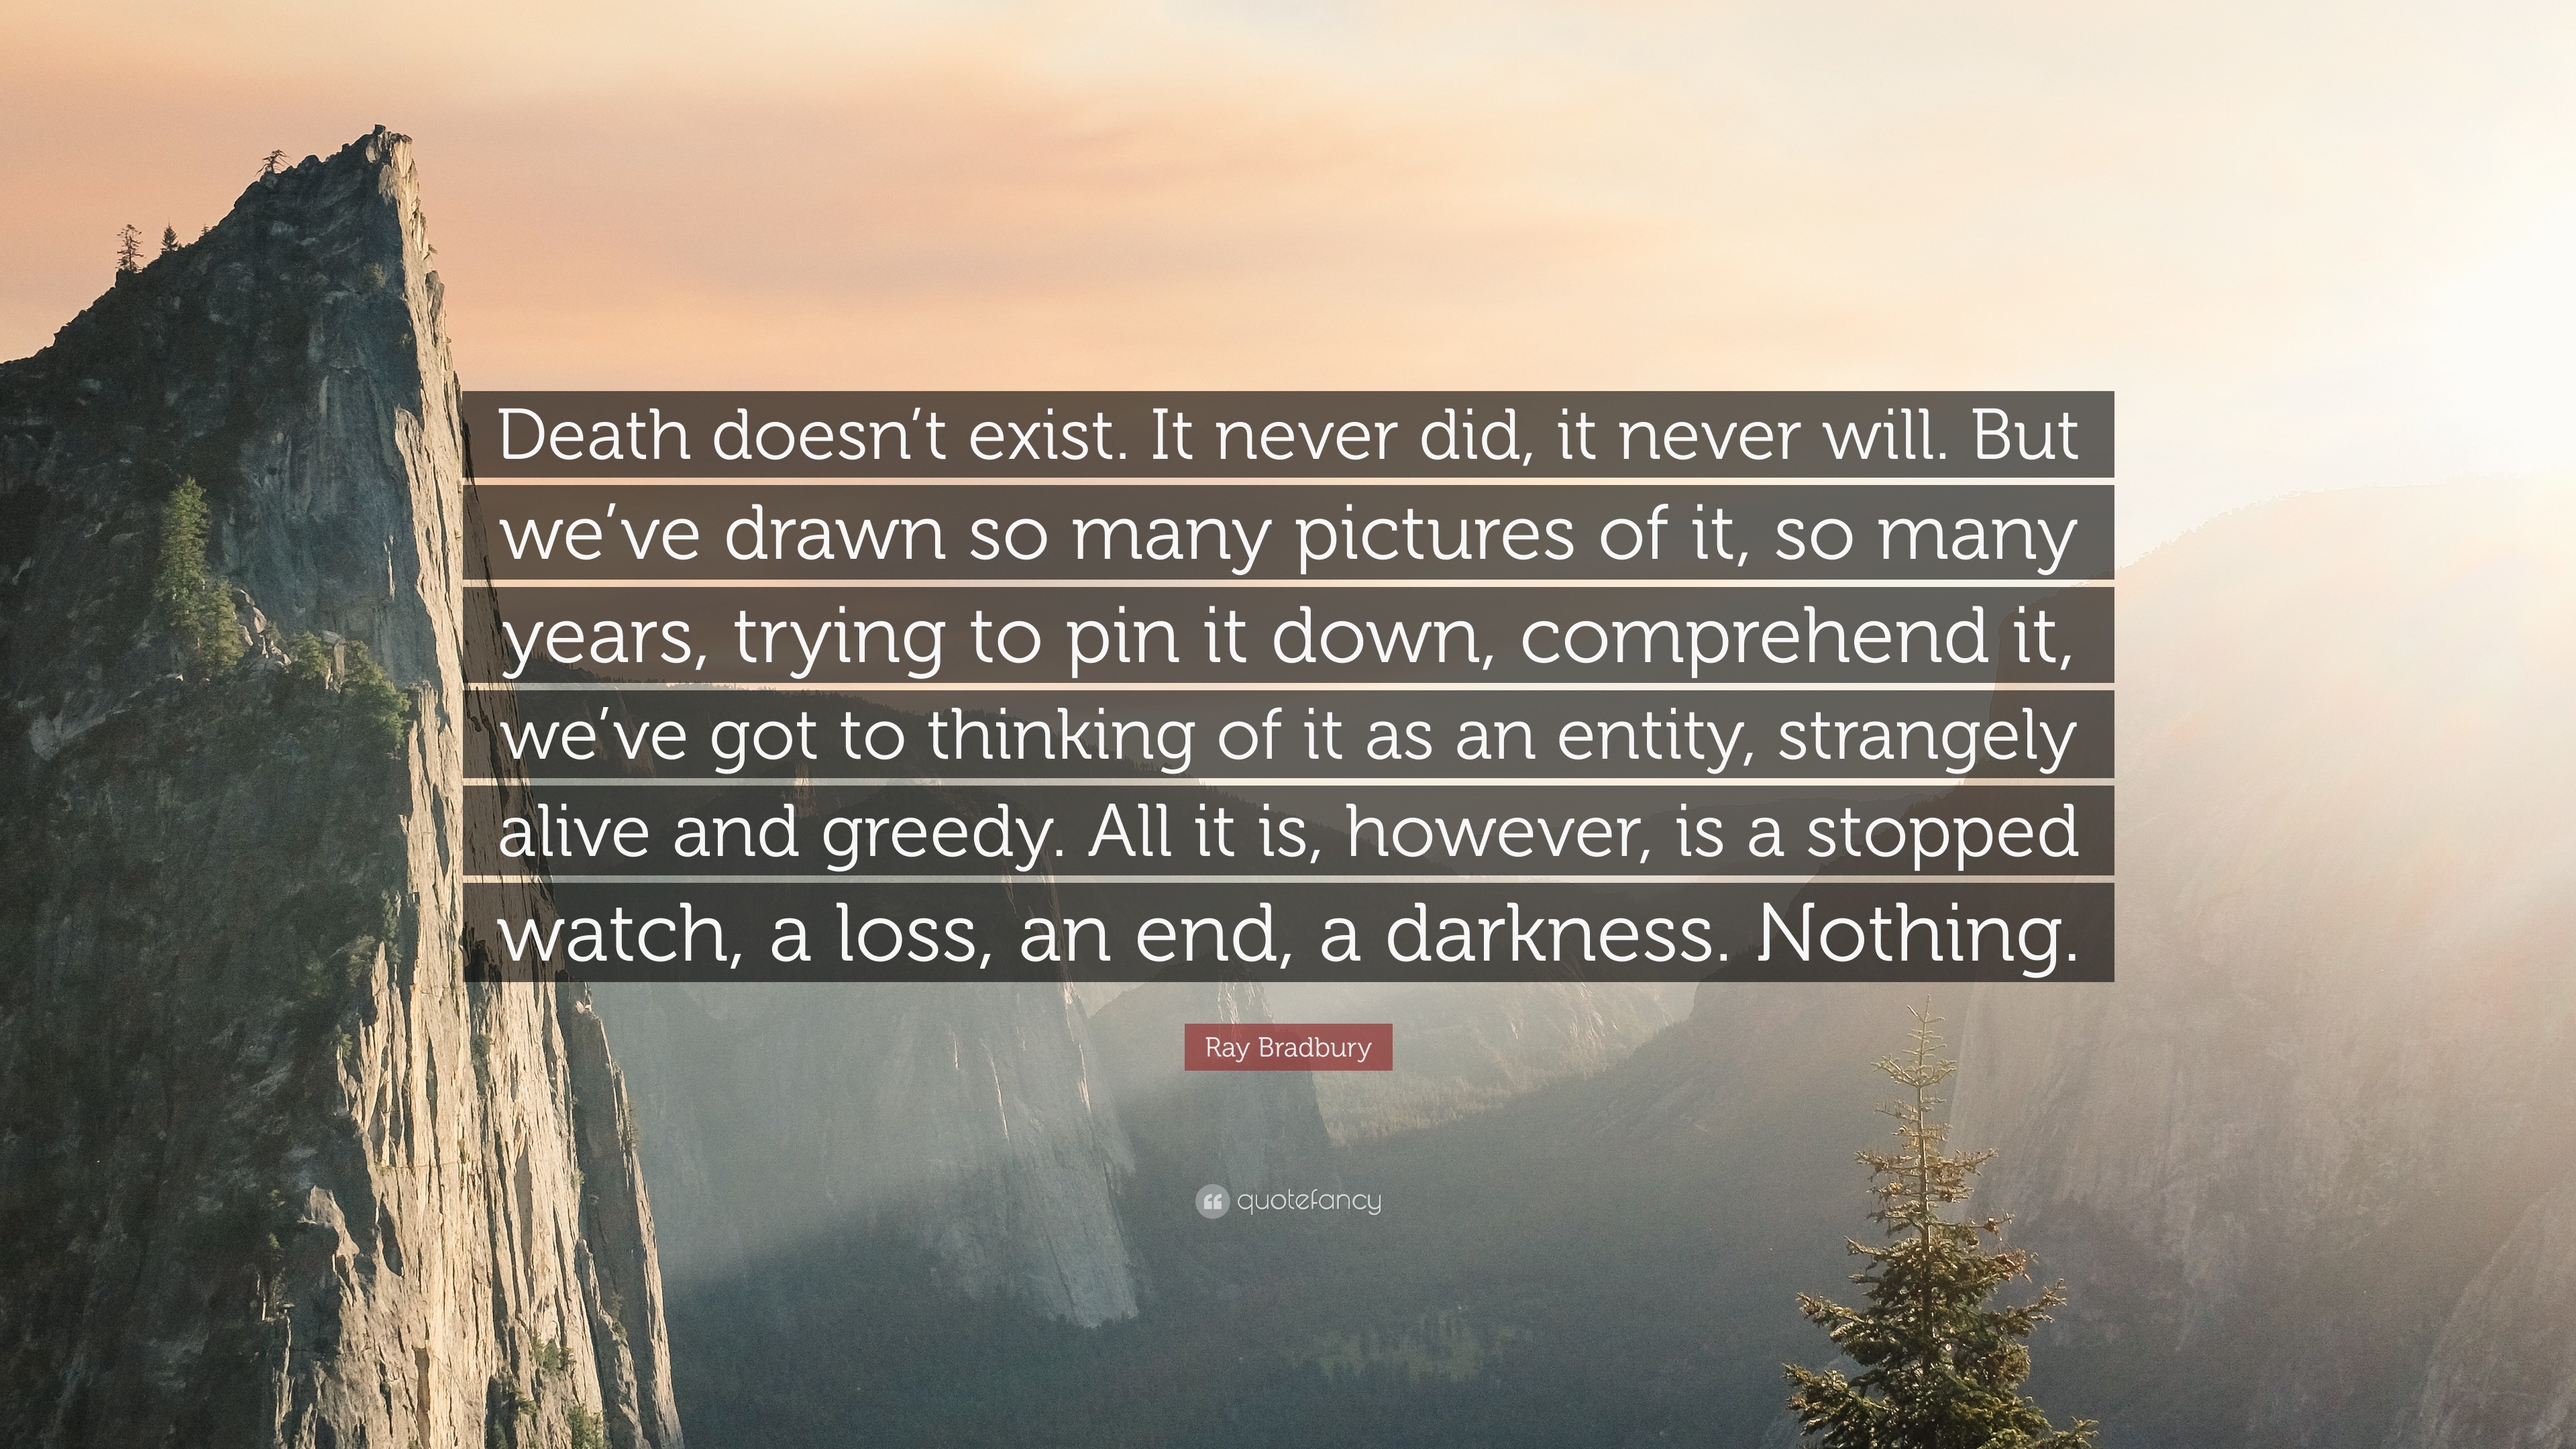 Ray Bradbury Quote: “Death doesn't exist. It never did, it never will. But  we've drawn so many pictures of it, so many years, trying to pin i”